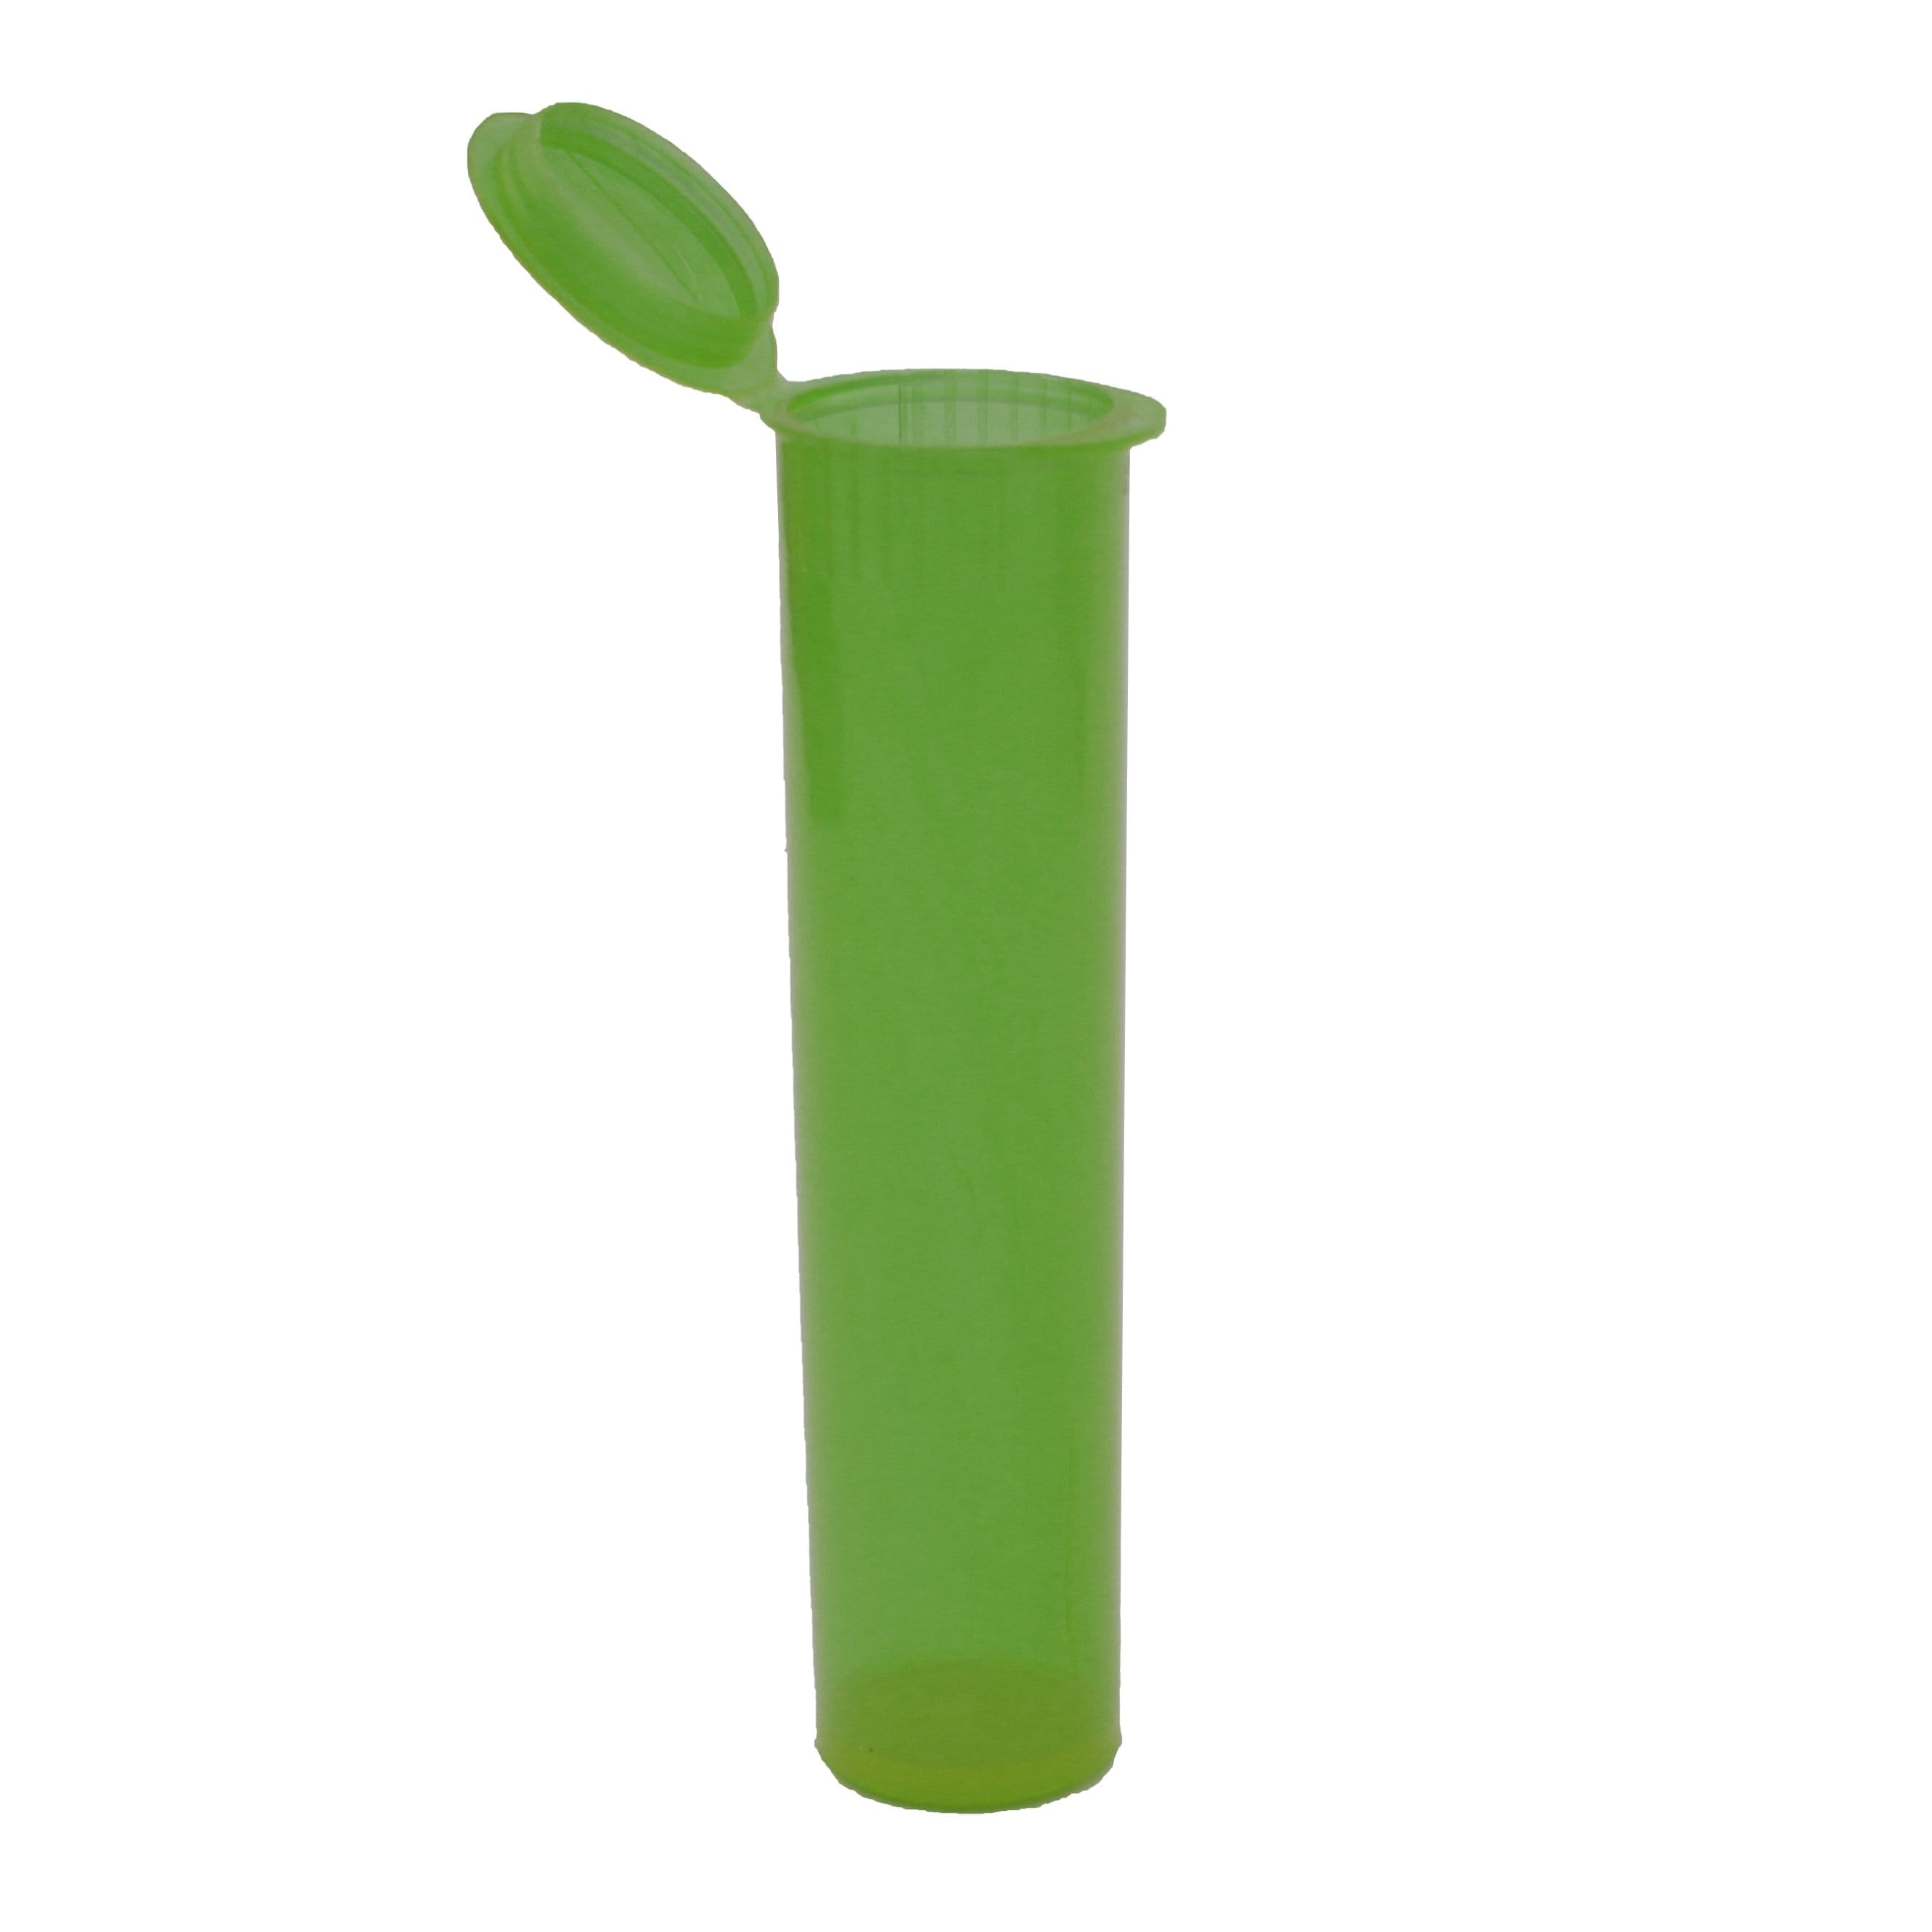 Translucent Squeeze Top Child-Resistant 78mm Pre-Roll Tube Translucent Green